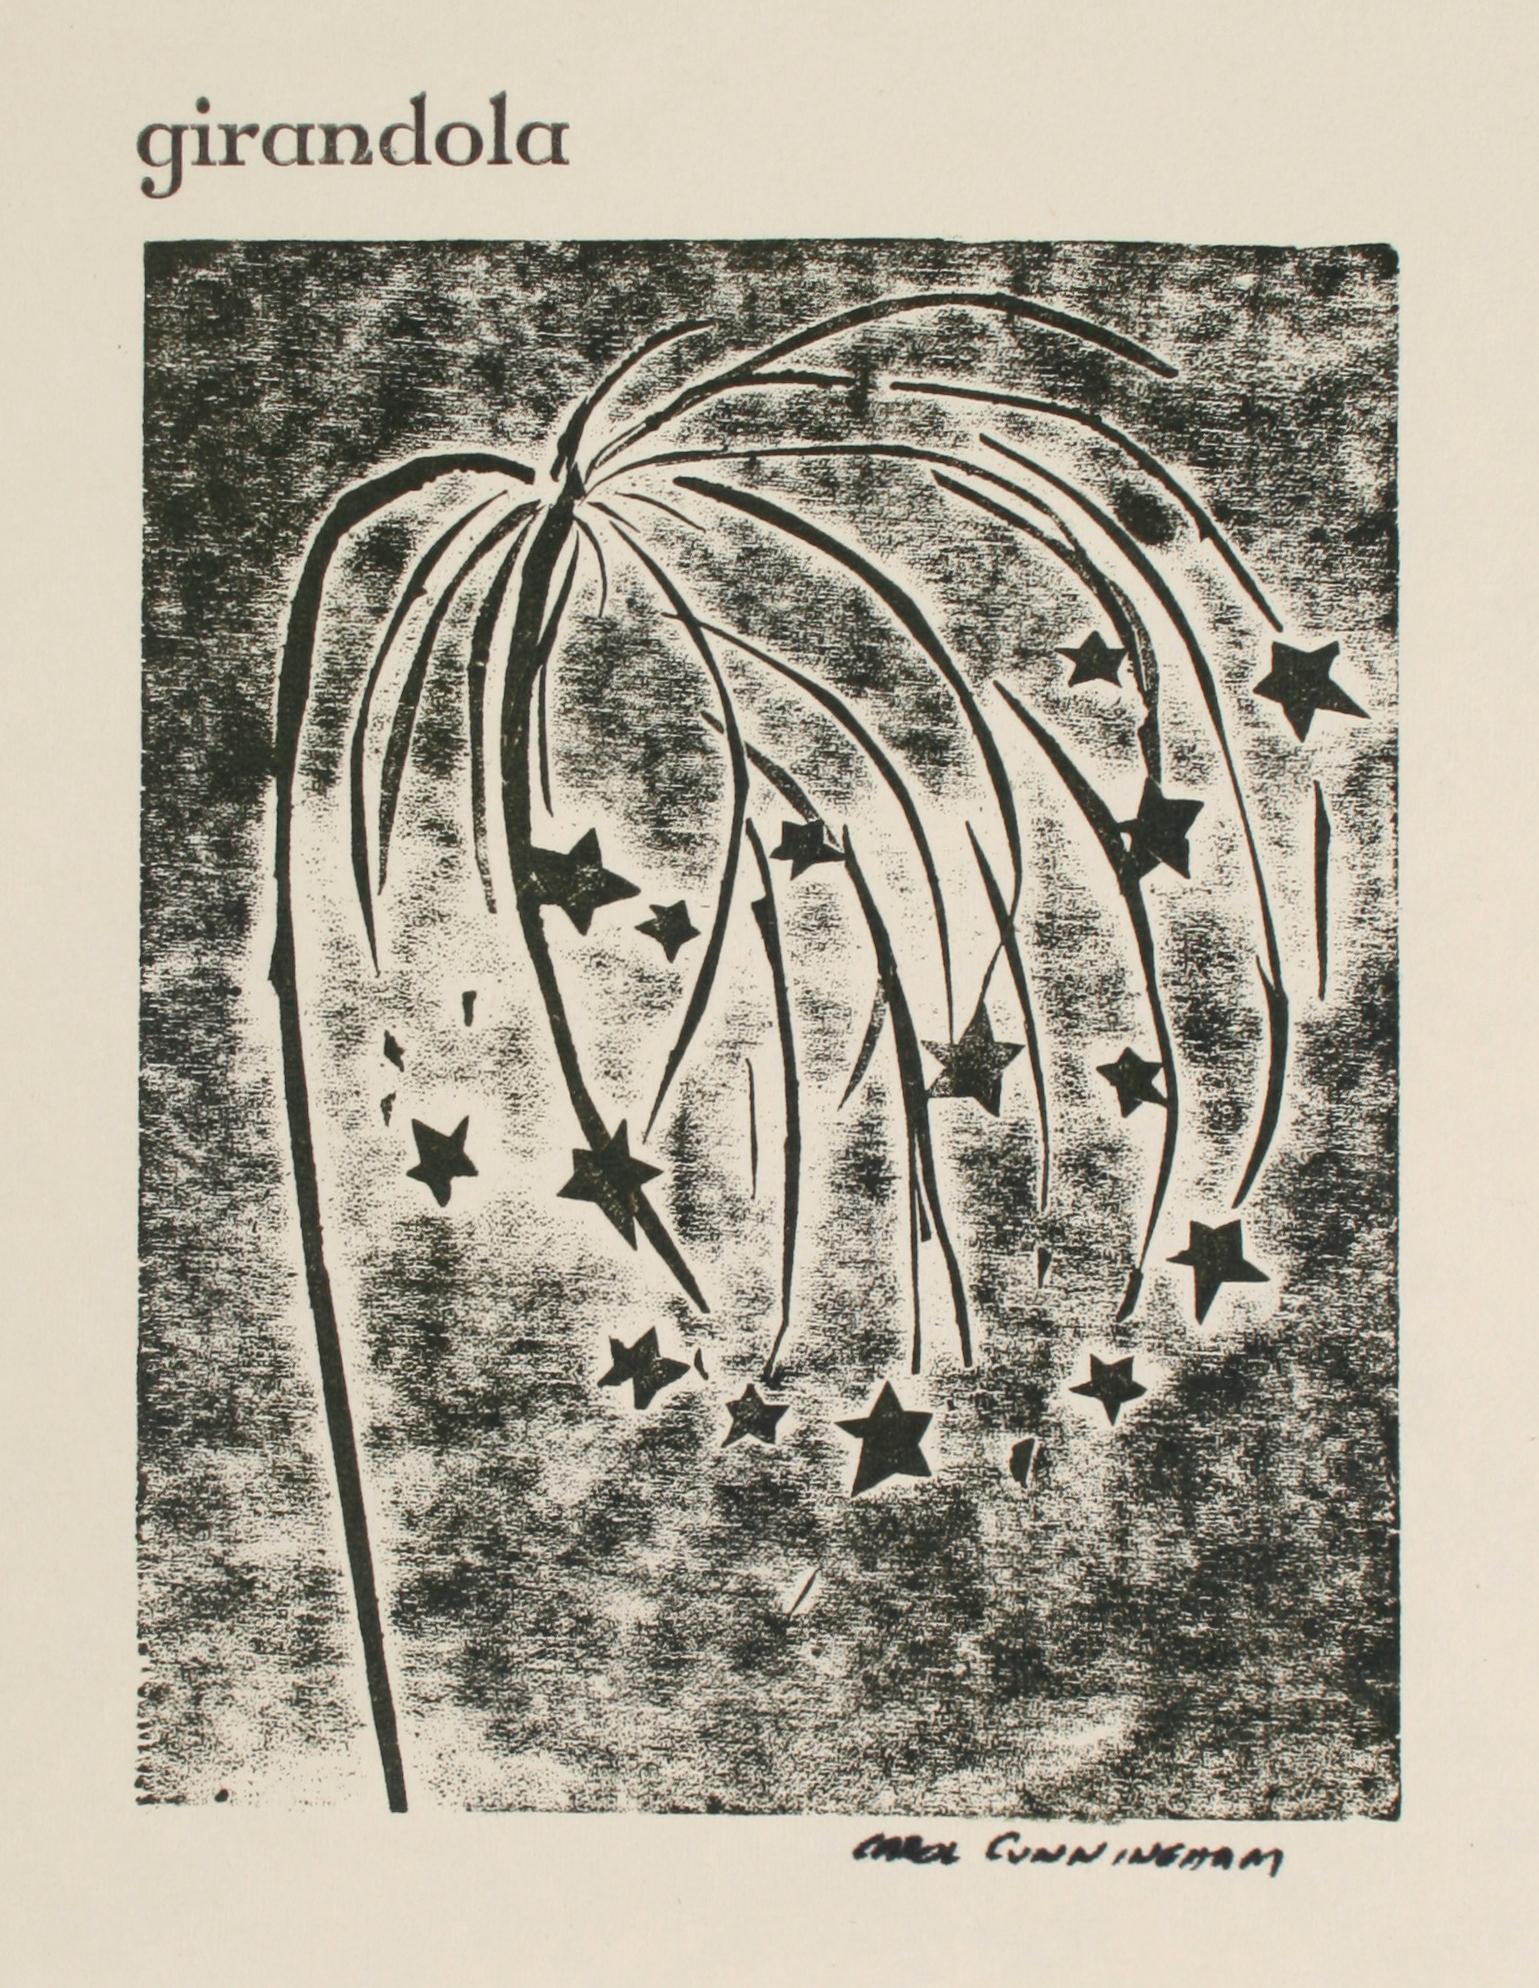 "Girandola" Italian meaning Candlestick, Lithograph on paper